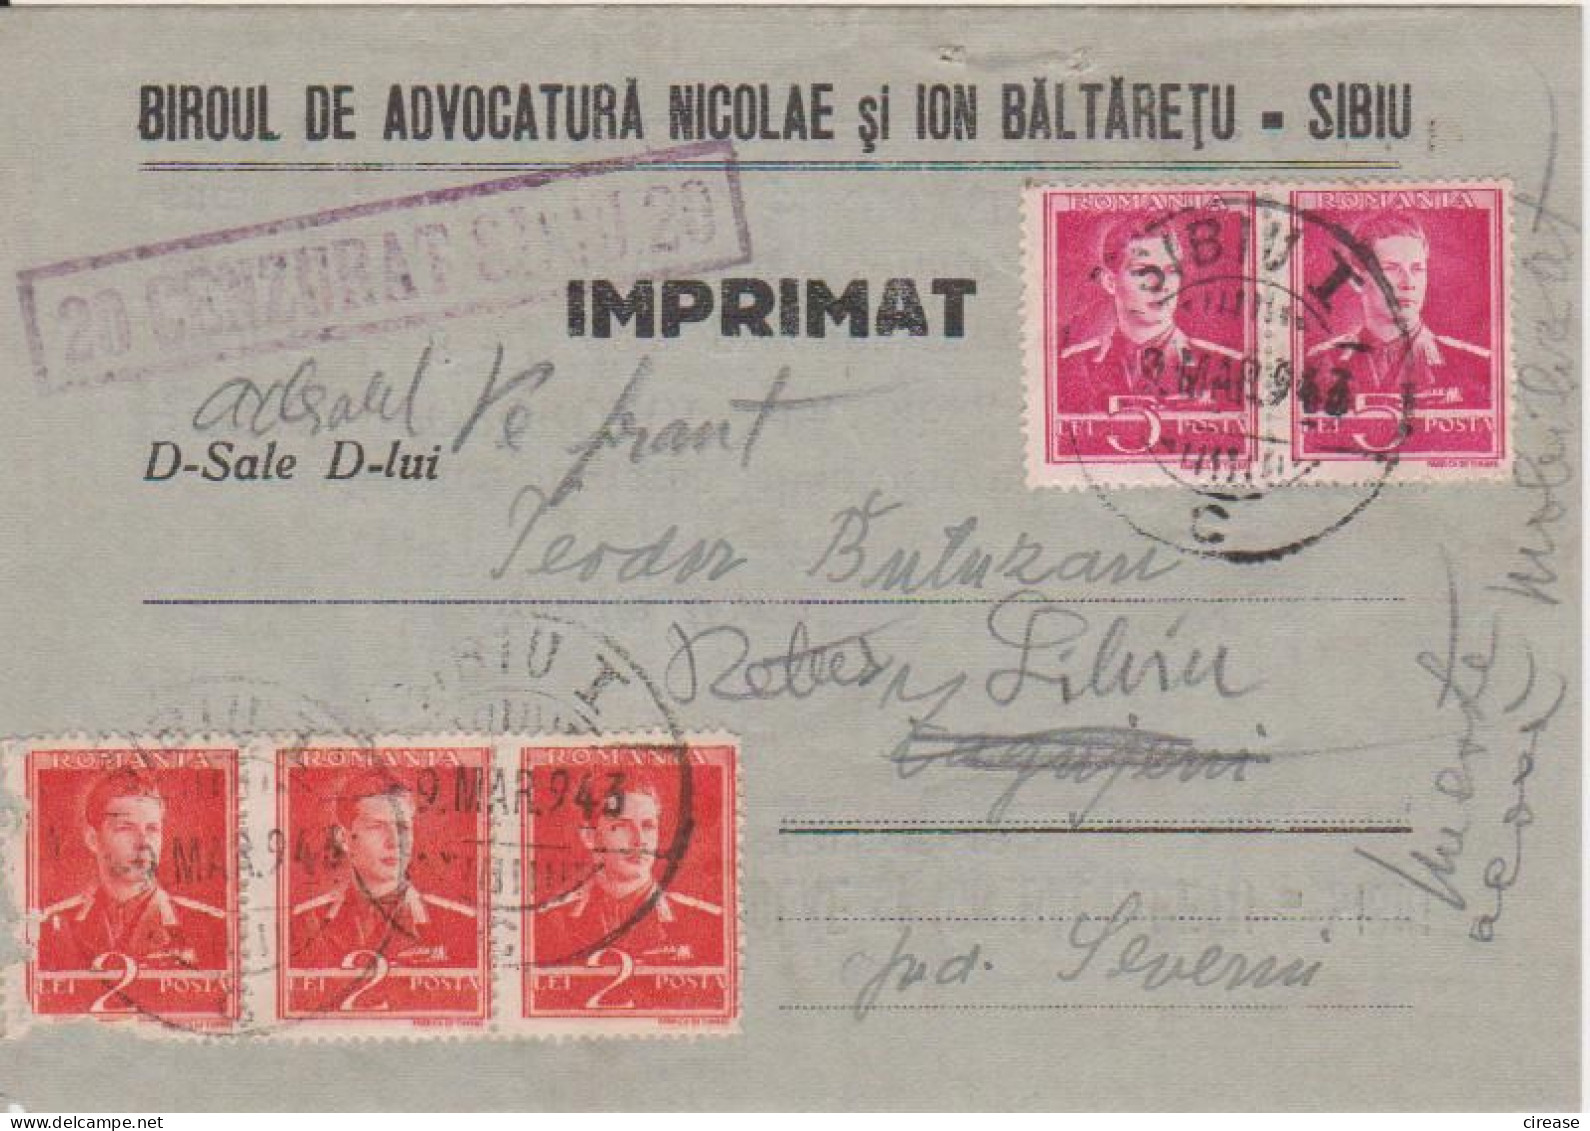 WW2 Cover 1943 Censorship, Commercial Office Lawyer, King Mihai ROMANIA - World War 2 Letters